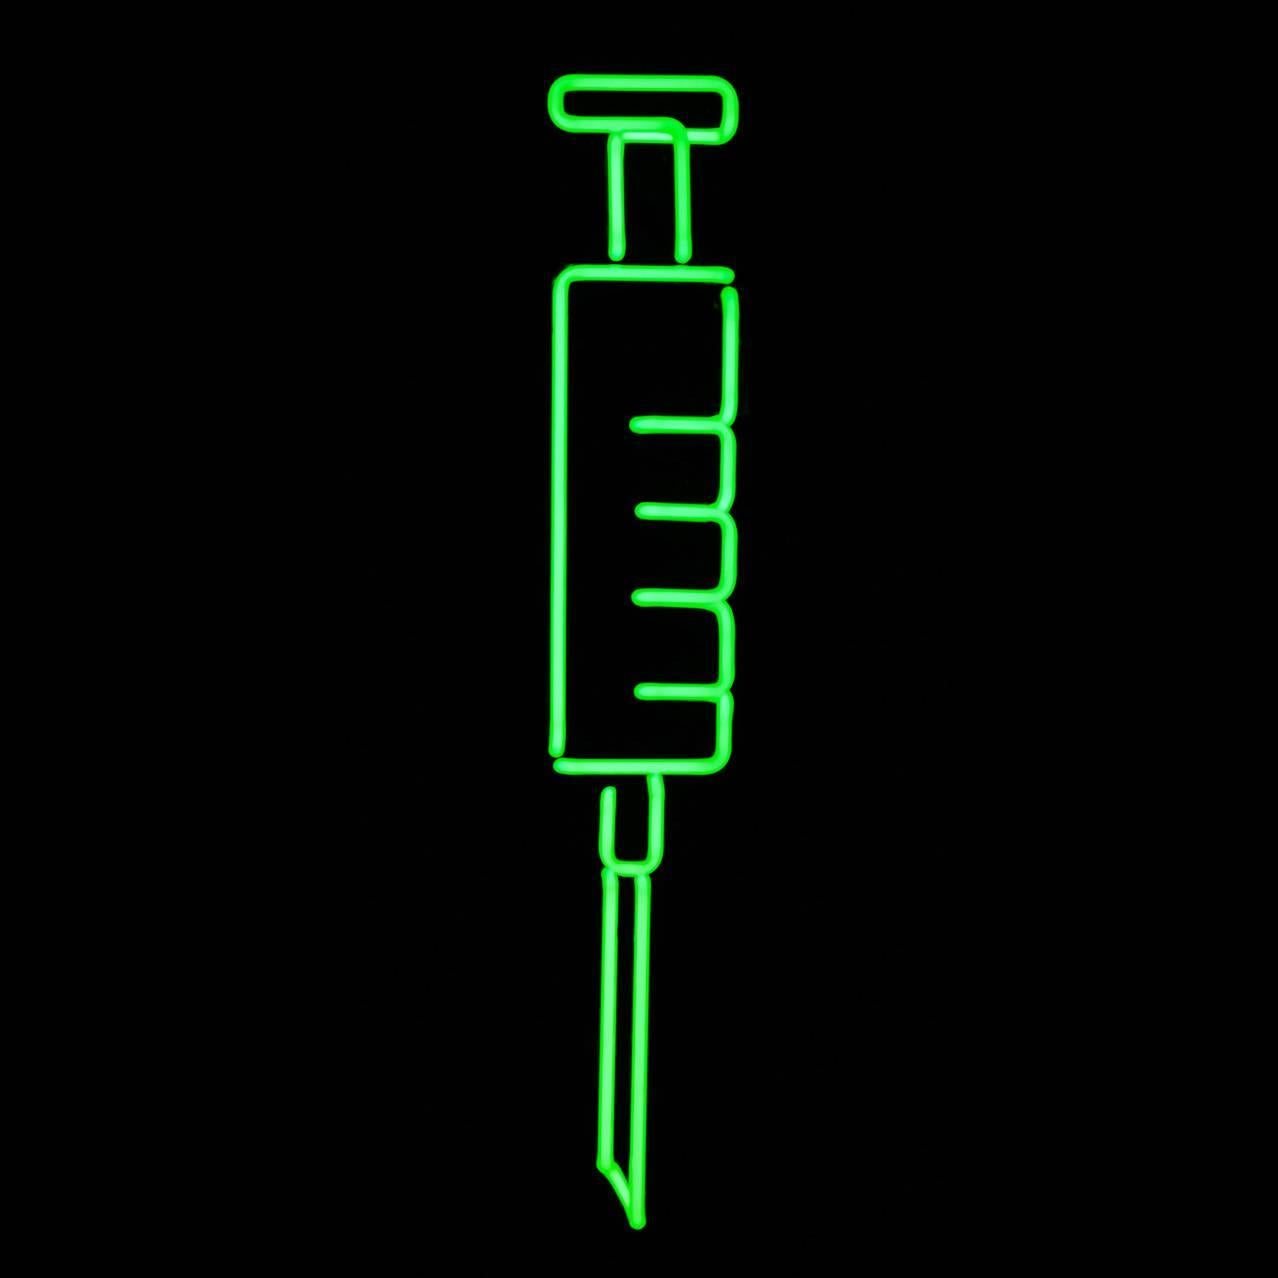 Lethal Injection (Neon Light) - Art by Susan Henderson